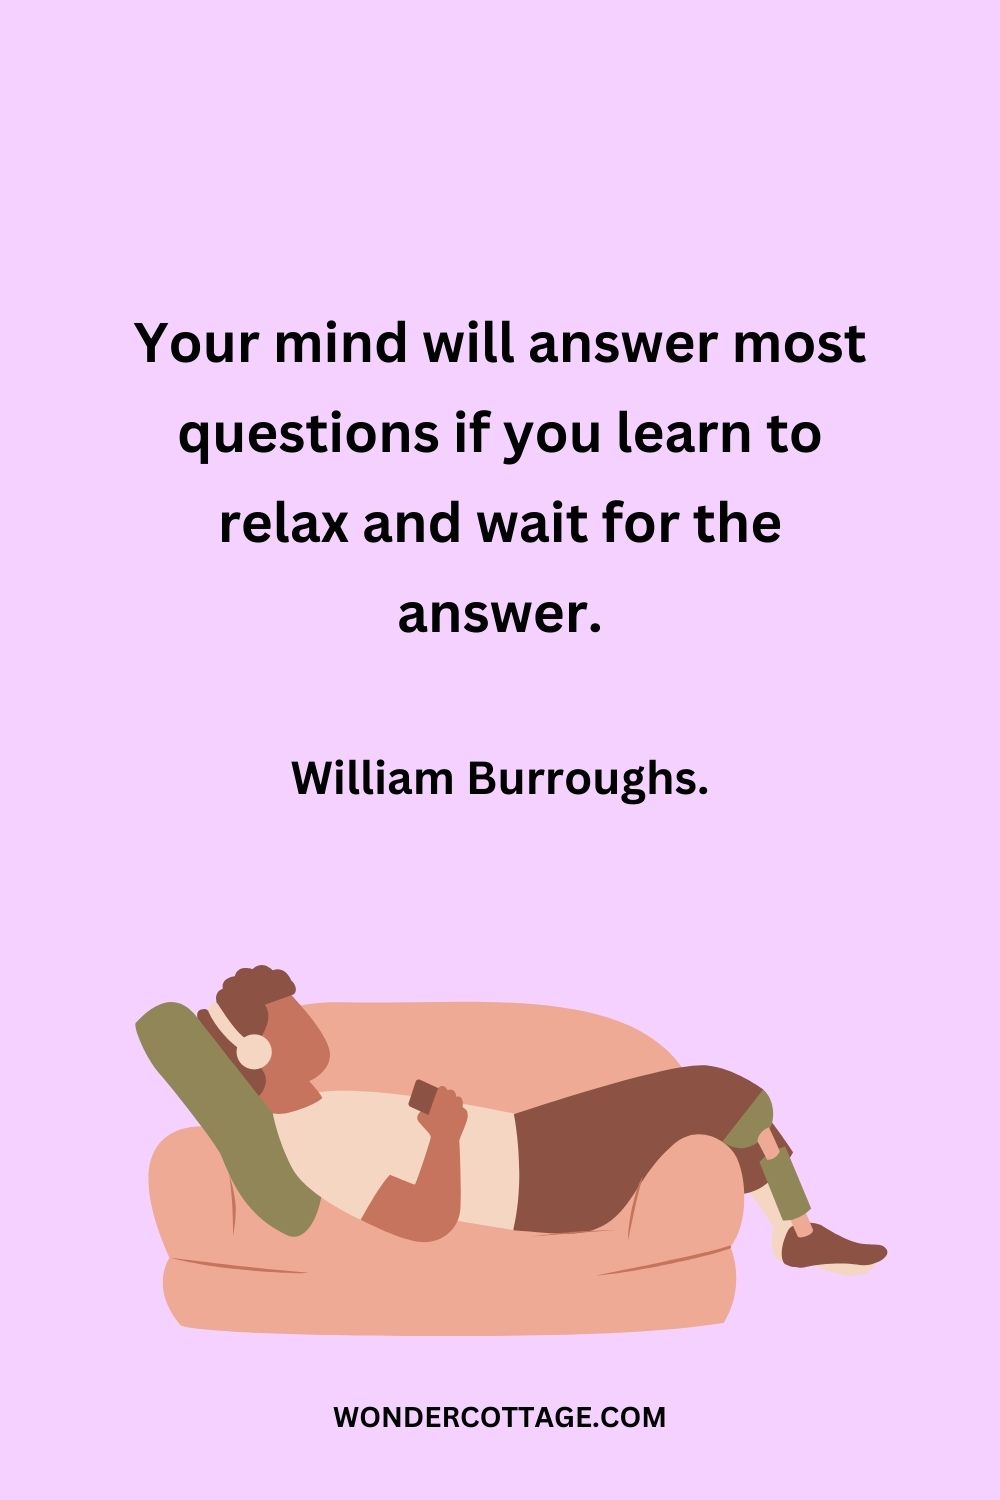 Your mind will answer most questions if you learn to relax and wait for the answer. William Burroughs.